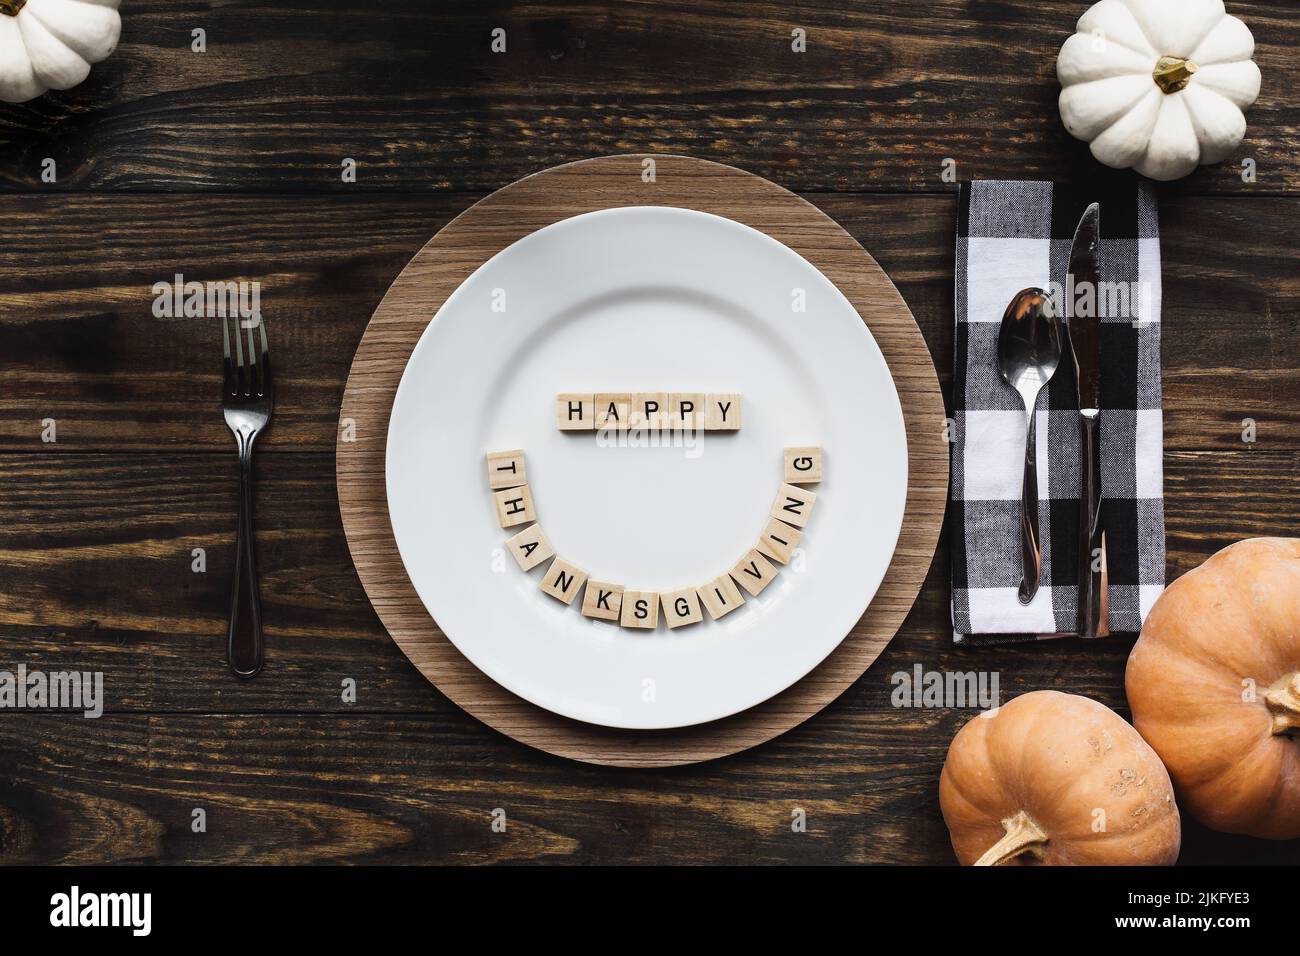 Place setting with plate, napkin, on a  decorated table shot from flat lay or top view position. Happy Thanksgiving Day spelled out with wood block le Stock Photo